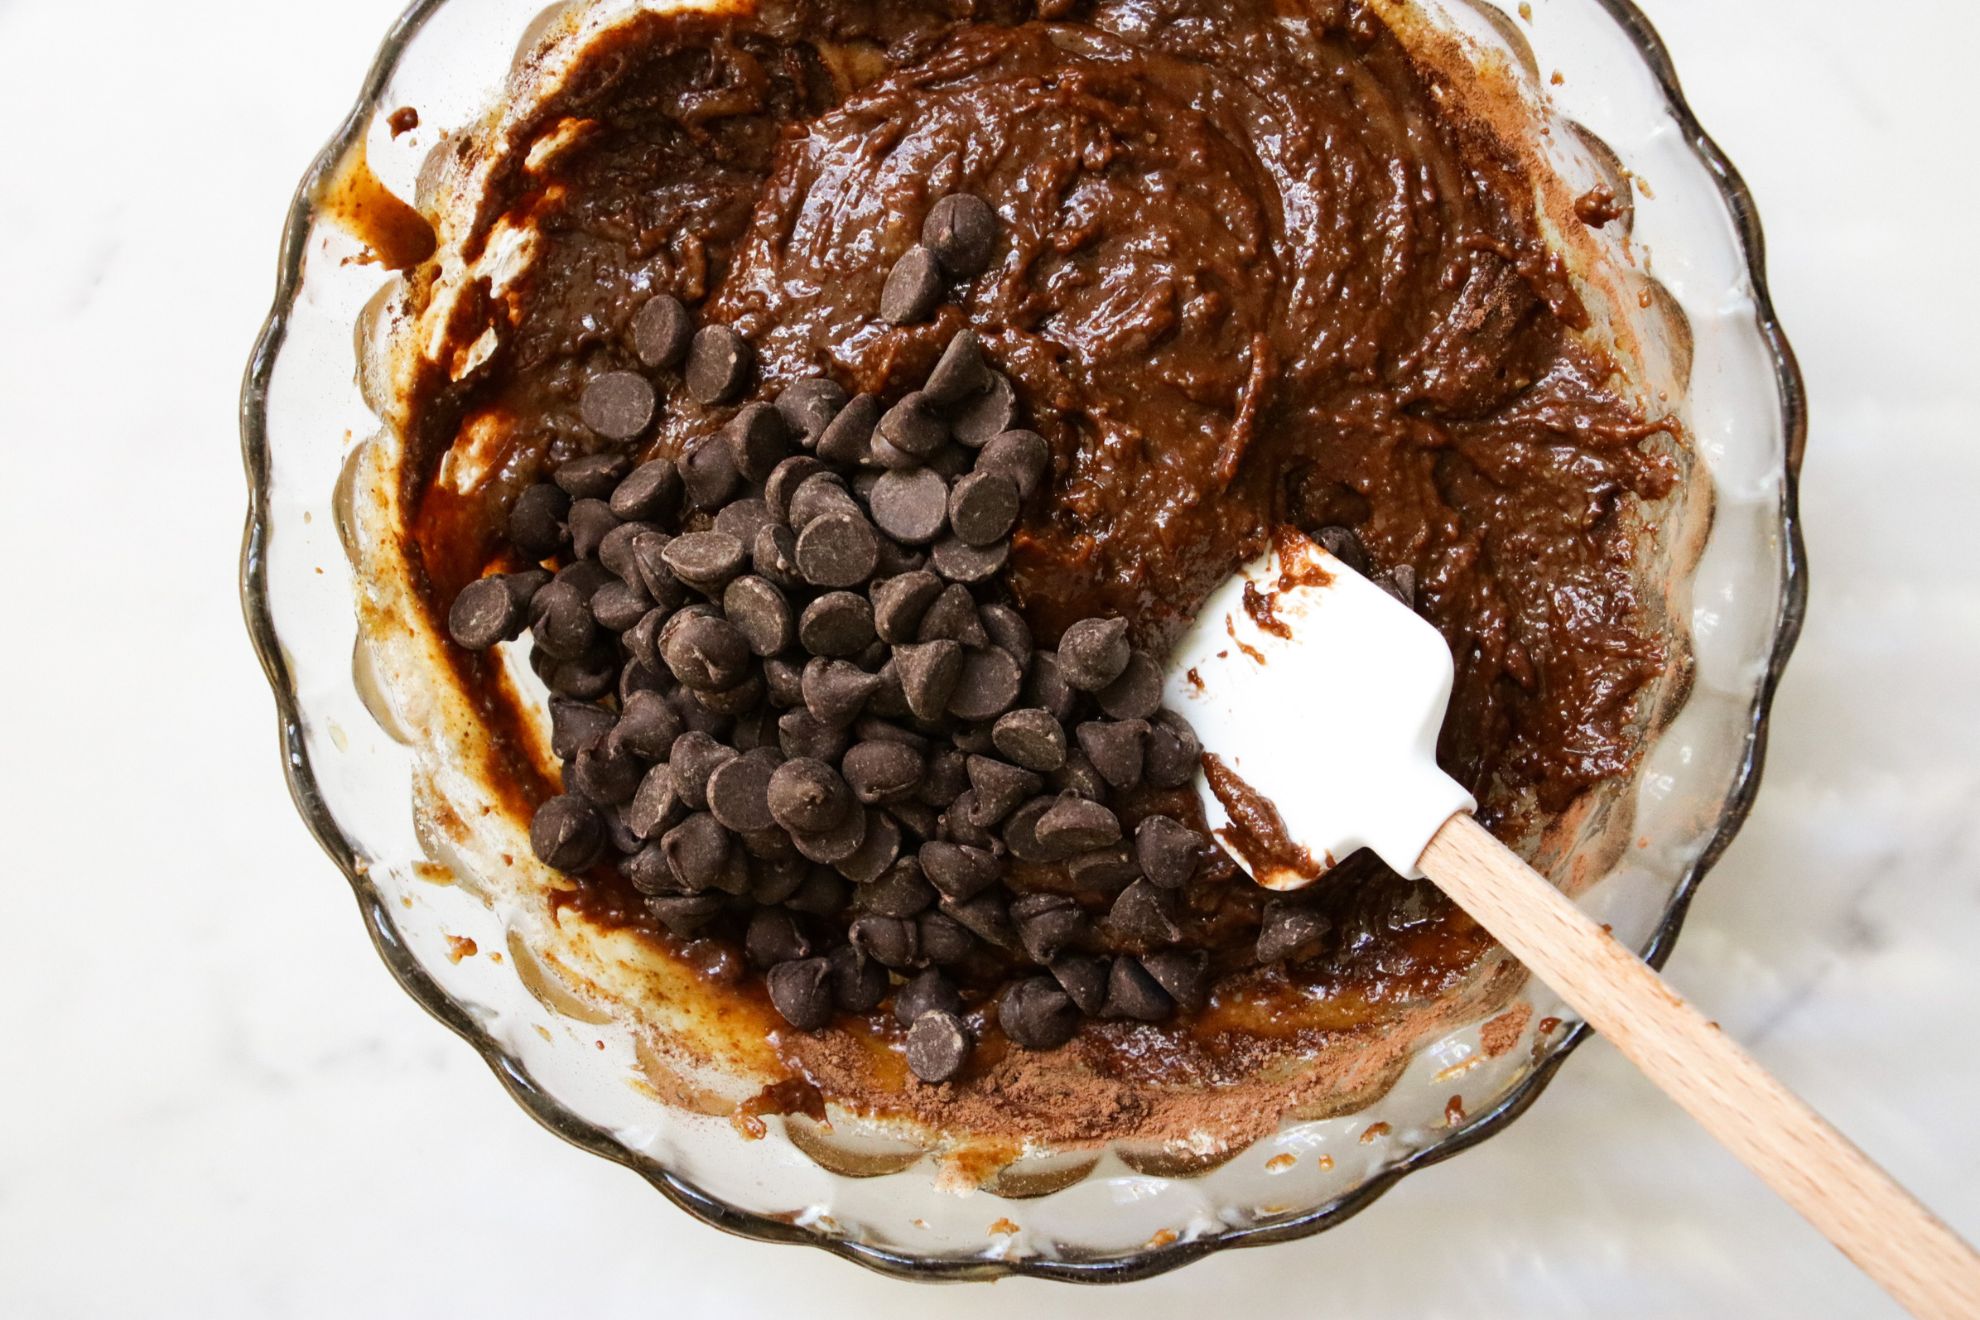 This is an overhead image looking into a glass bowl with brownie batter. There are chocolate chips on top of the brownie batter and a white rubber spatula with a wood handle in the batter and leaning on the side of the bowl. The bowl sits on a white marble counter.